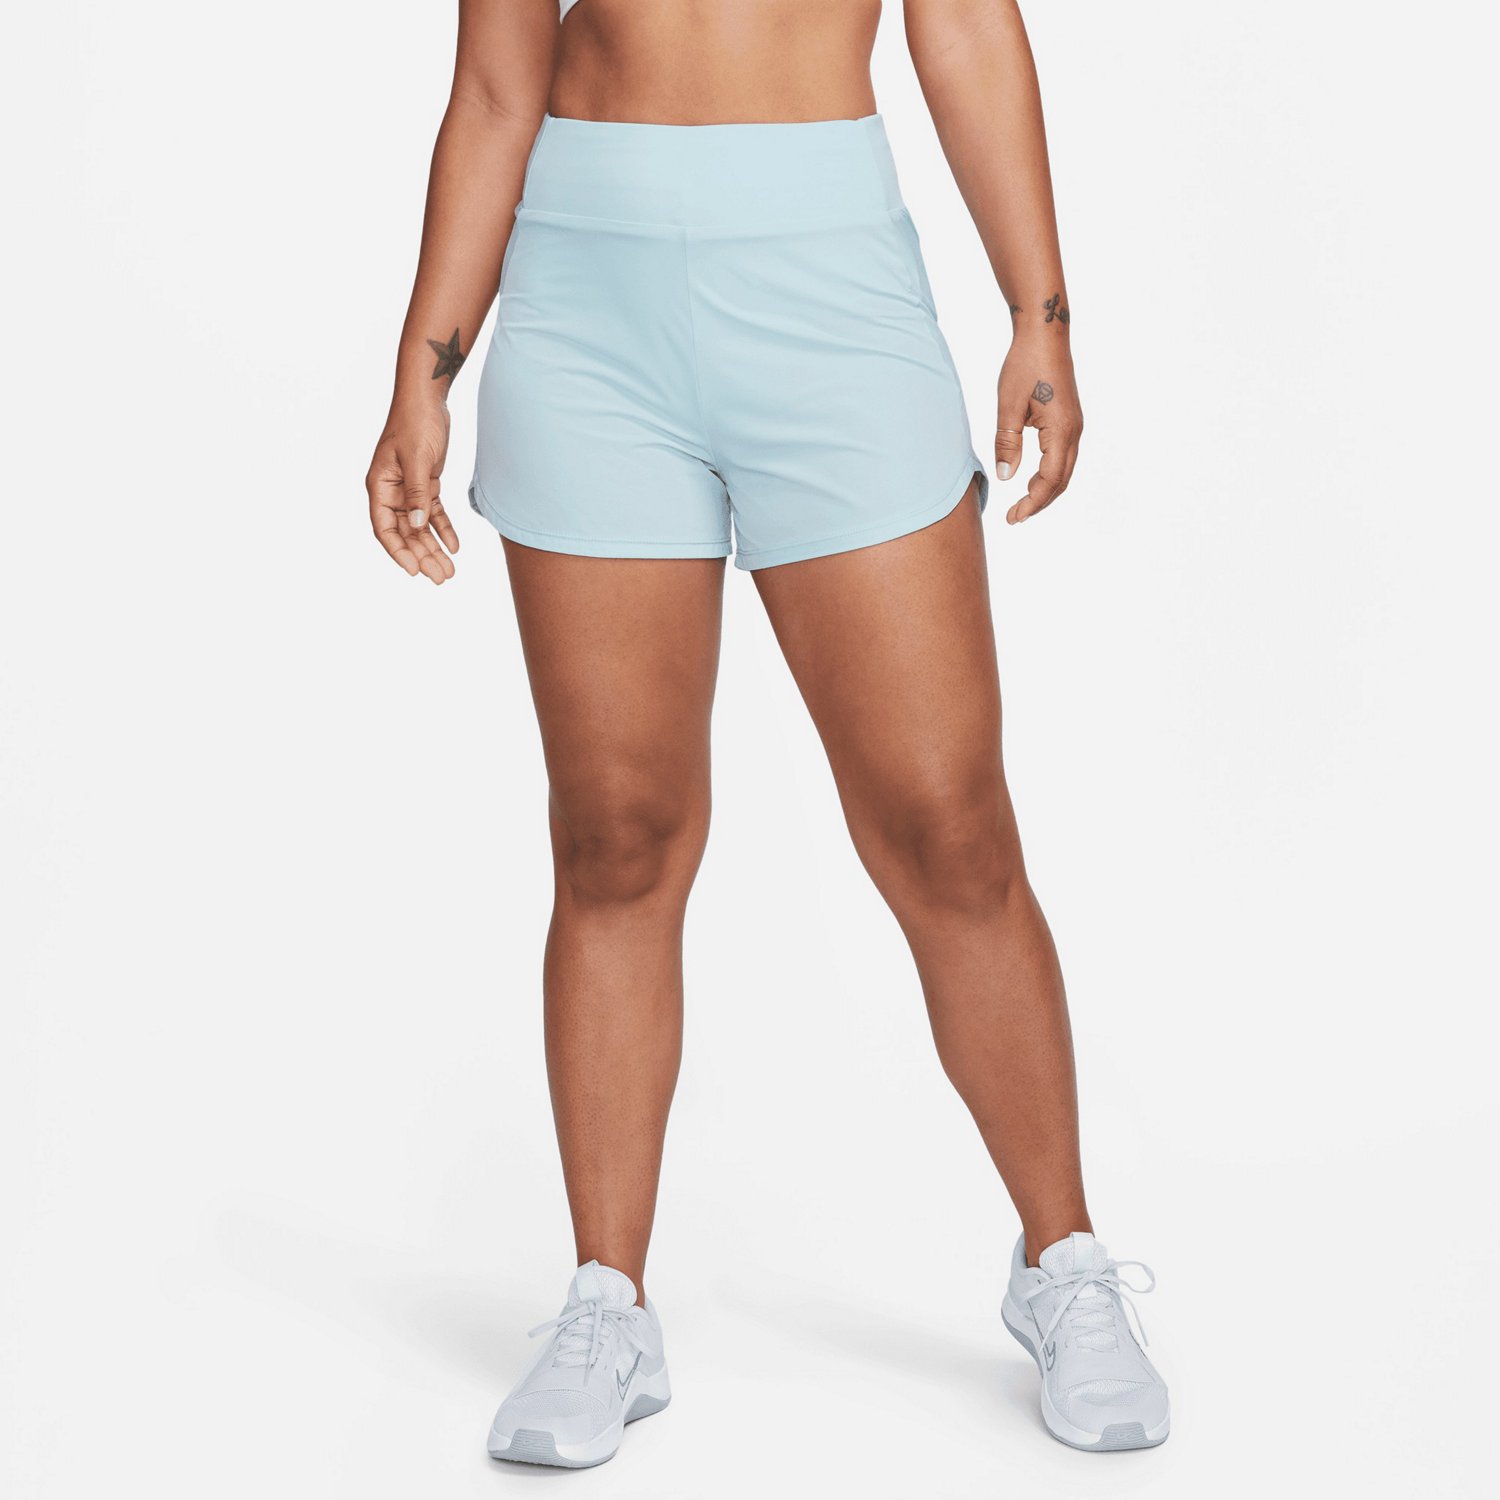 Nike Women's Dri-FIT Bliss High-Waisted Shorts 3 in